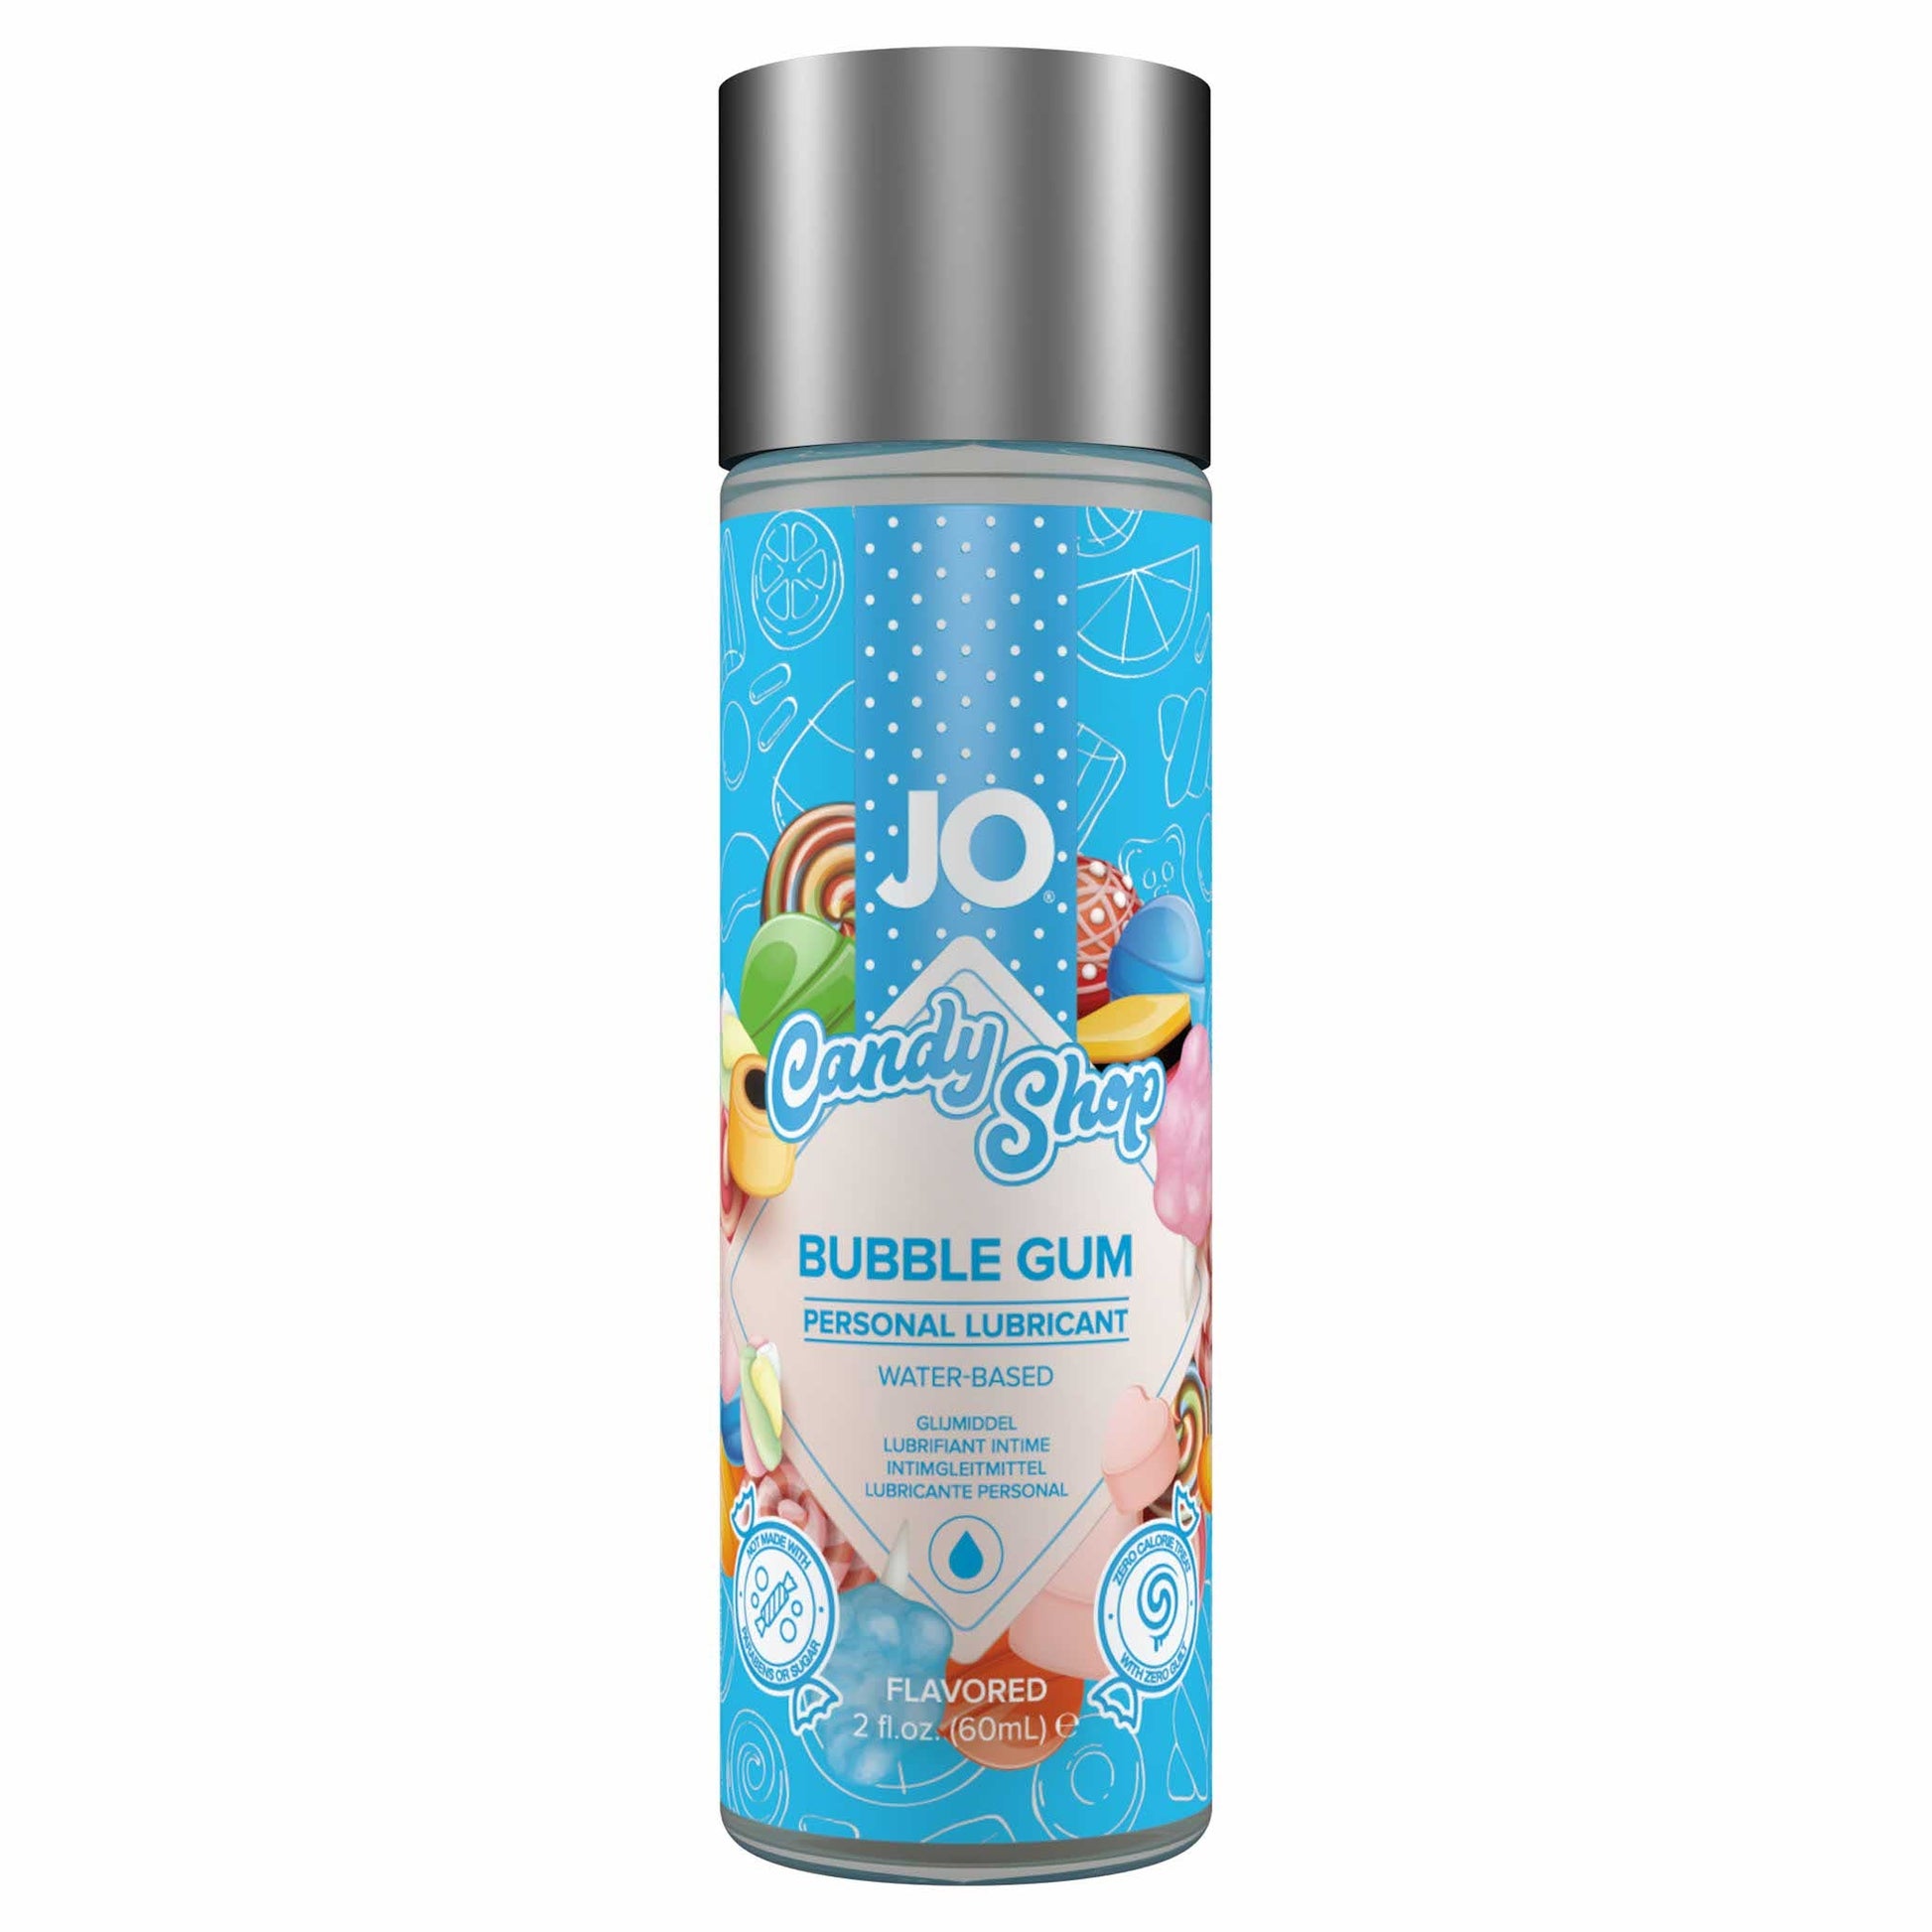 front view of the jo h2o candy shop water-based flavored personal lubricant 2 fl. oz. 4g0632 bubble gum